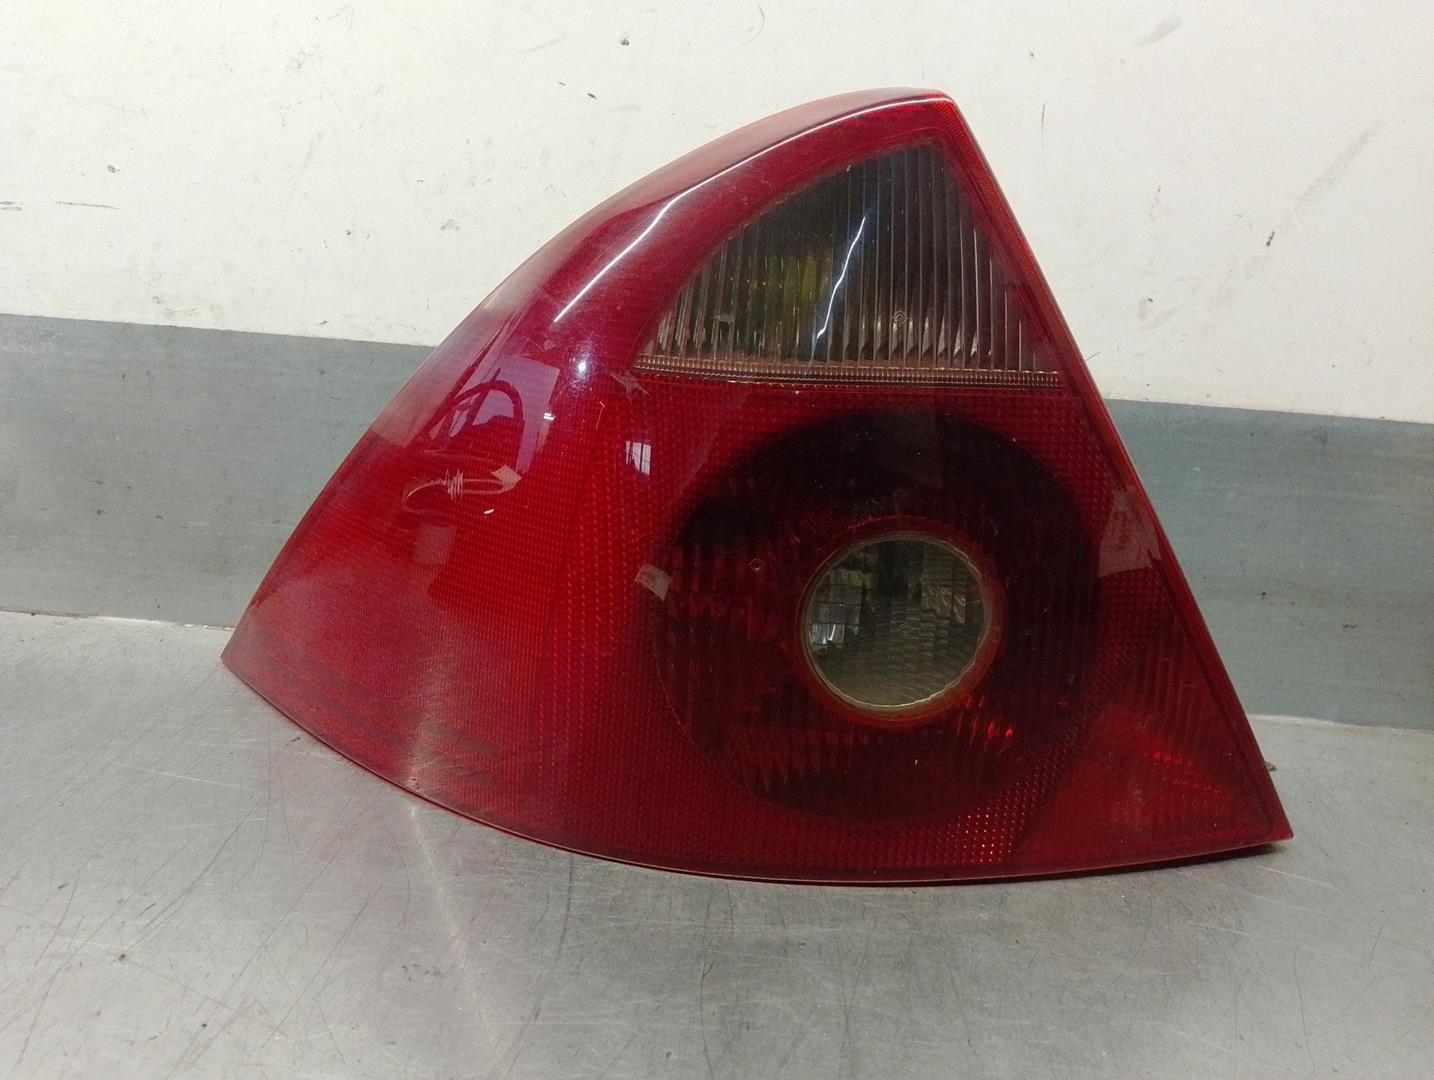 FORD MONDEO III (B5Y) Rear Left Taillight 1S7113405A, 5PUERTAS 24578346